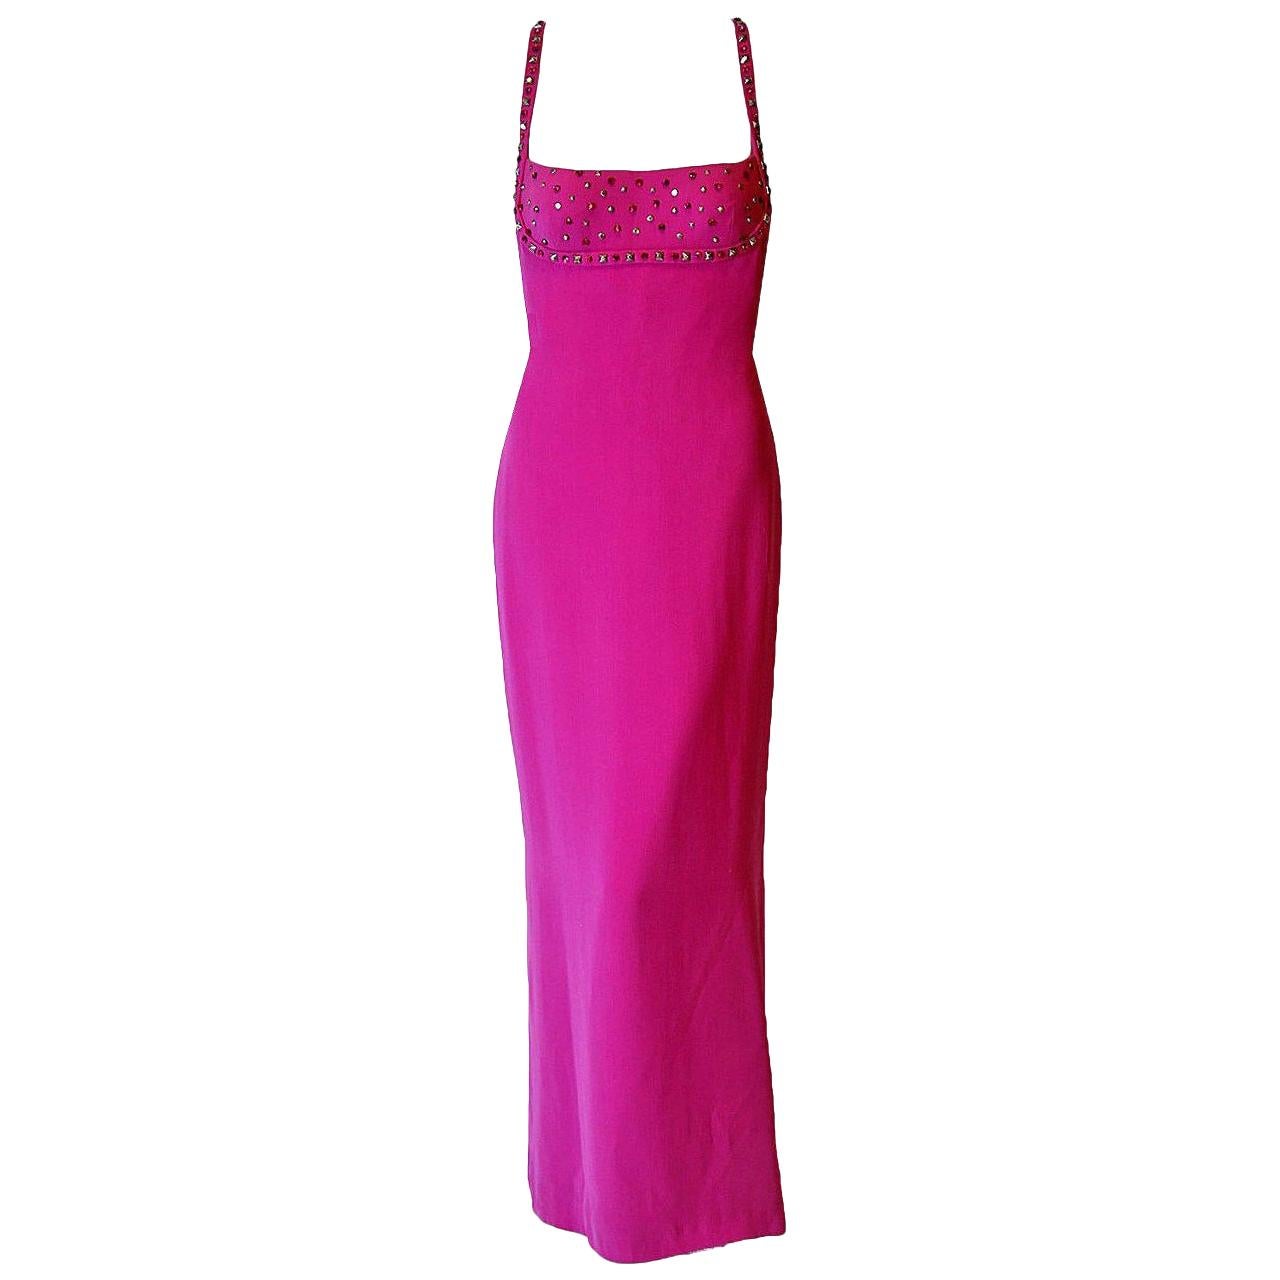 Vintage 1995 Gianni Versace Couture Fuchsia Silk Studded Low-Cut Hourglass Gown